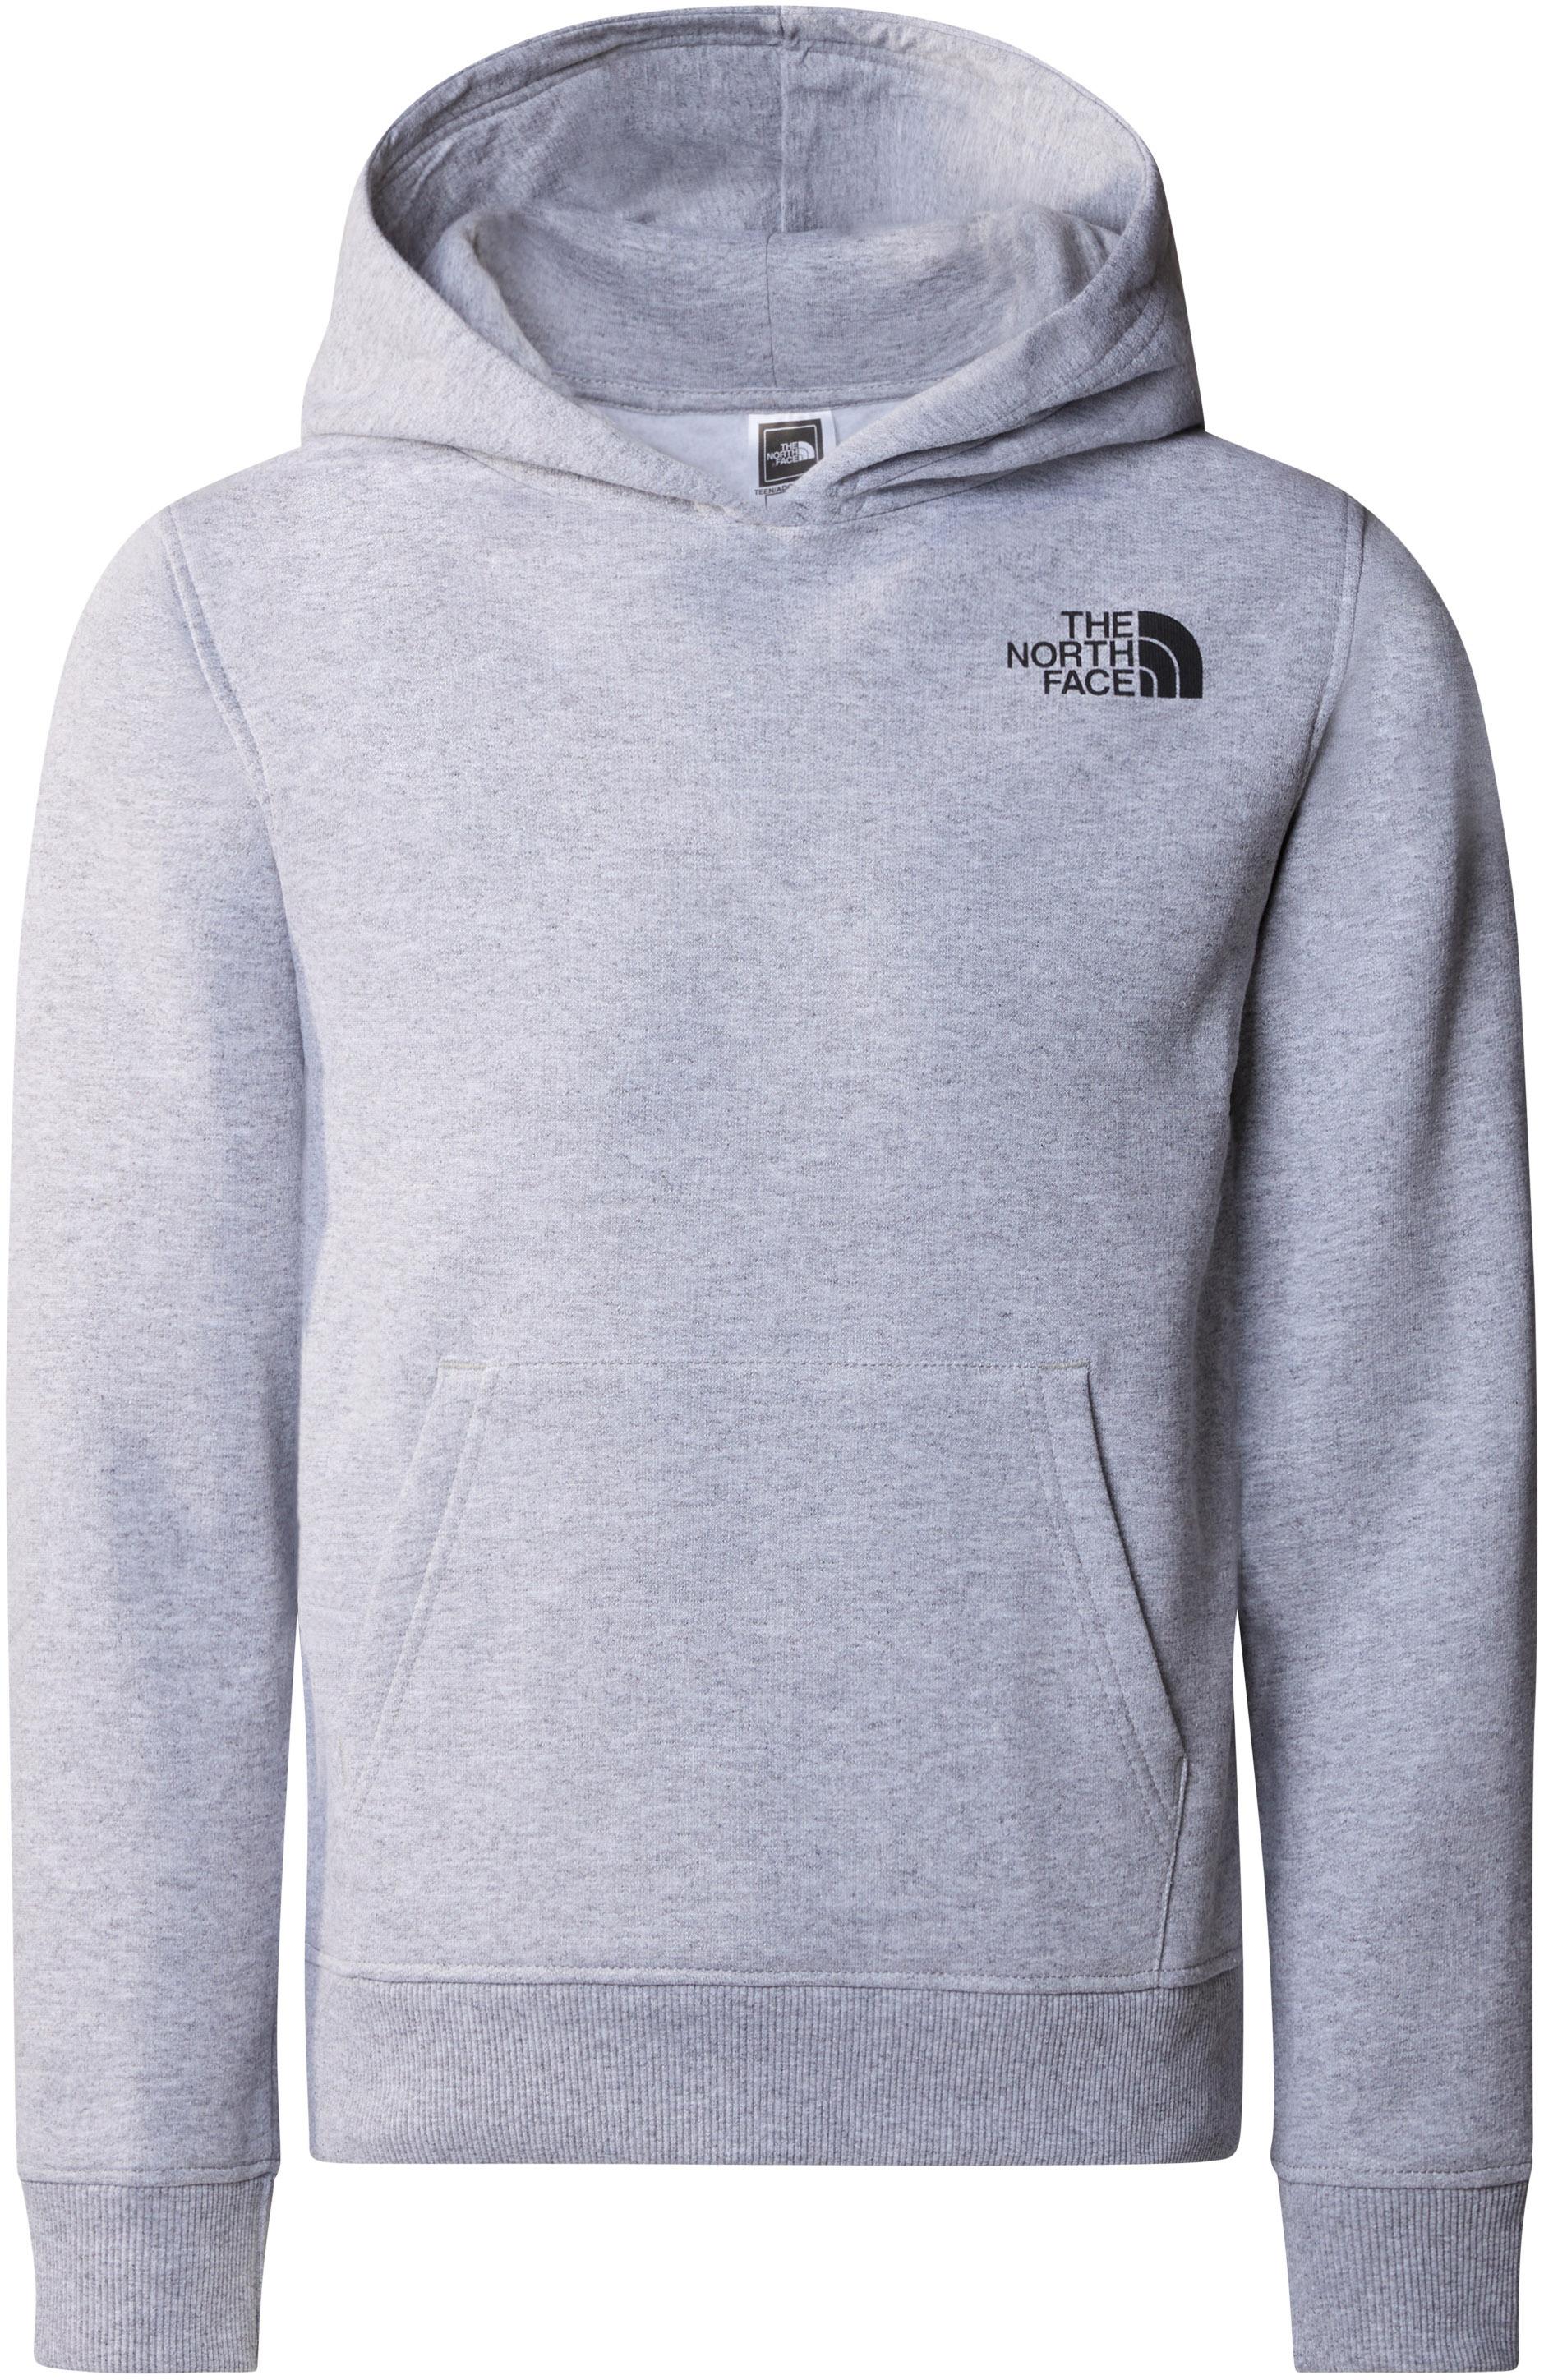 The North Face NEW GRAPHIC Hoodie Kinder